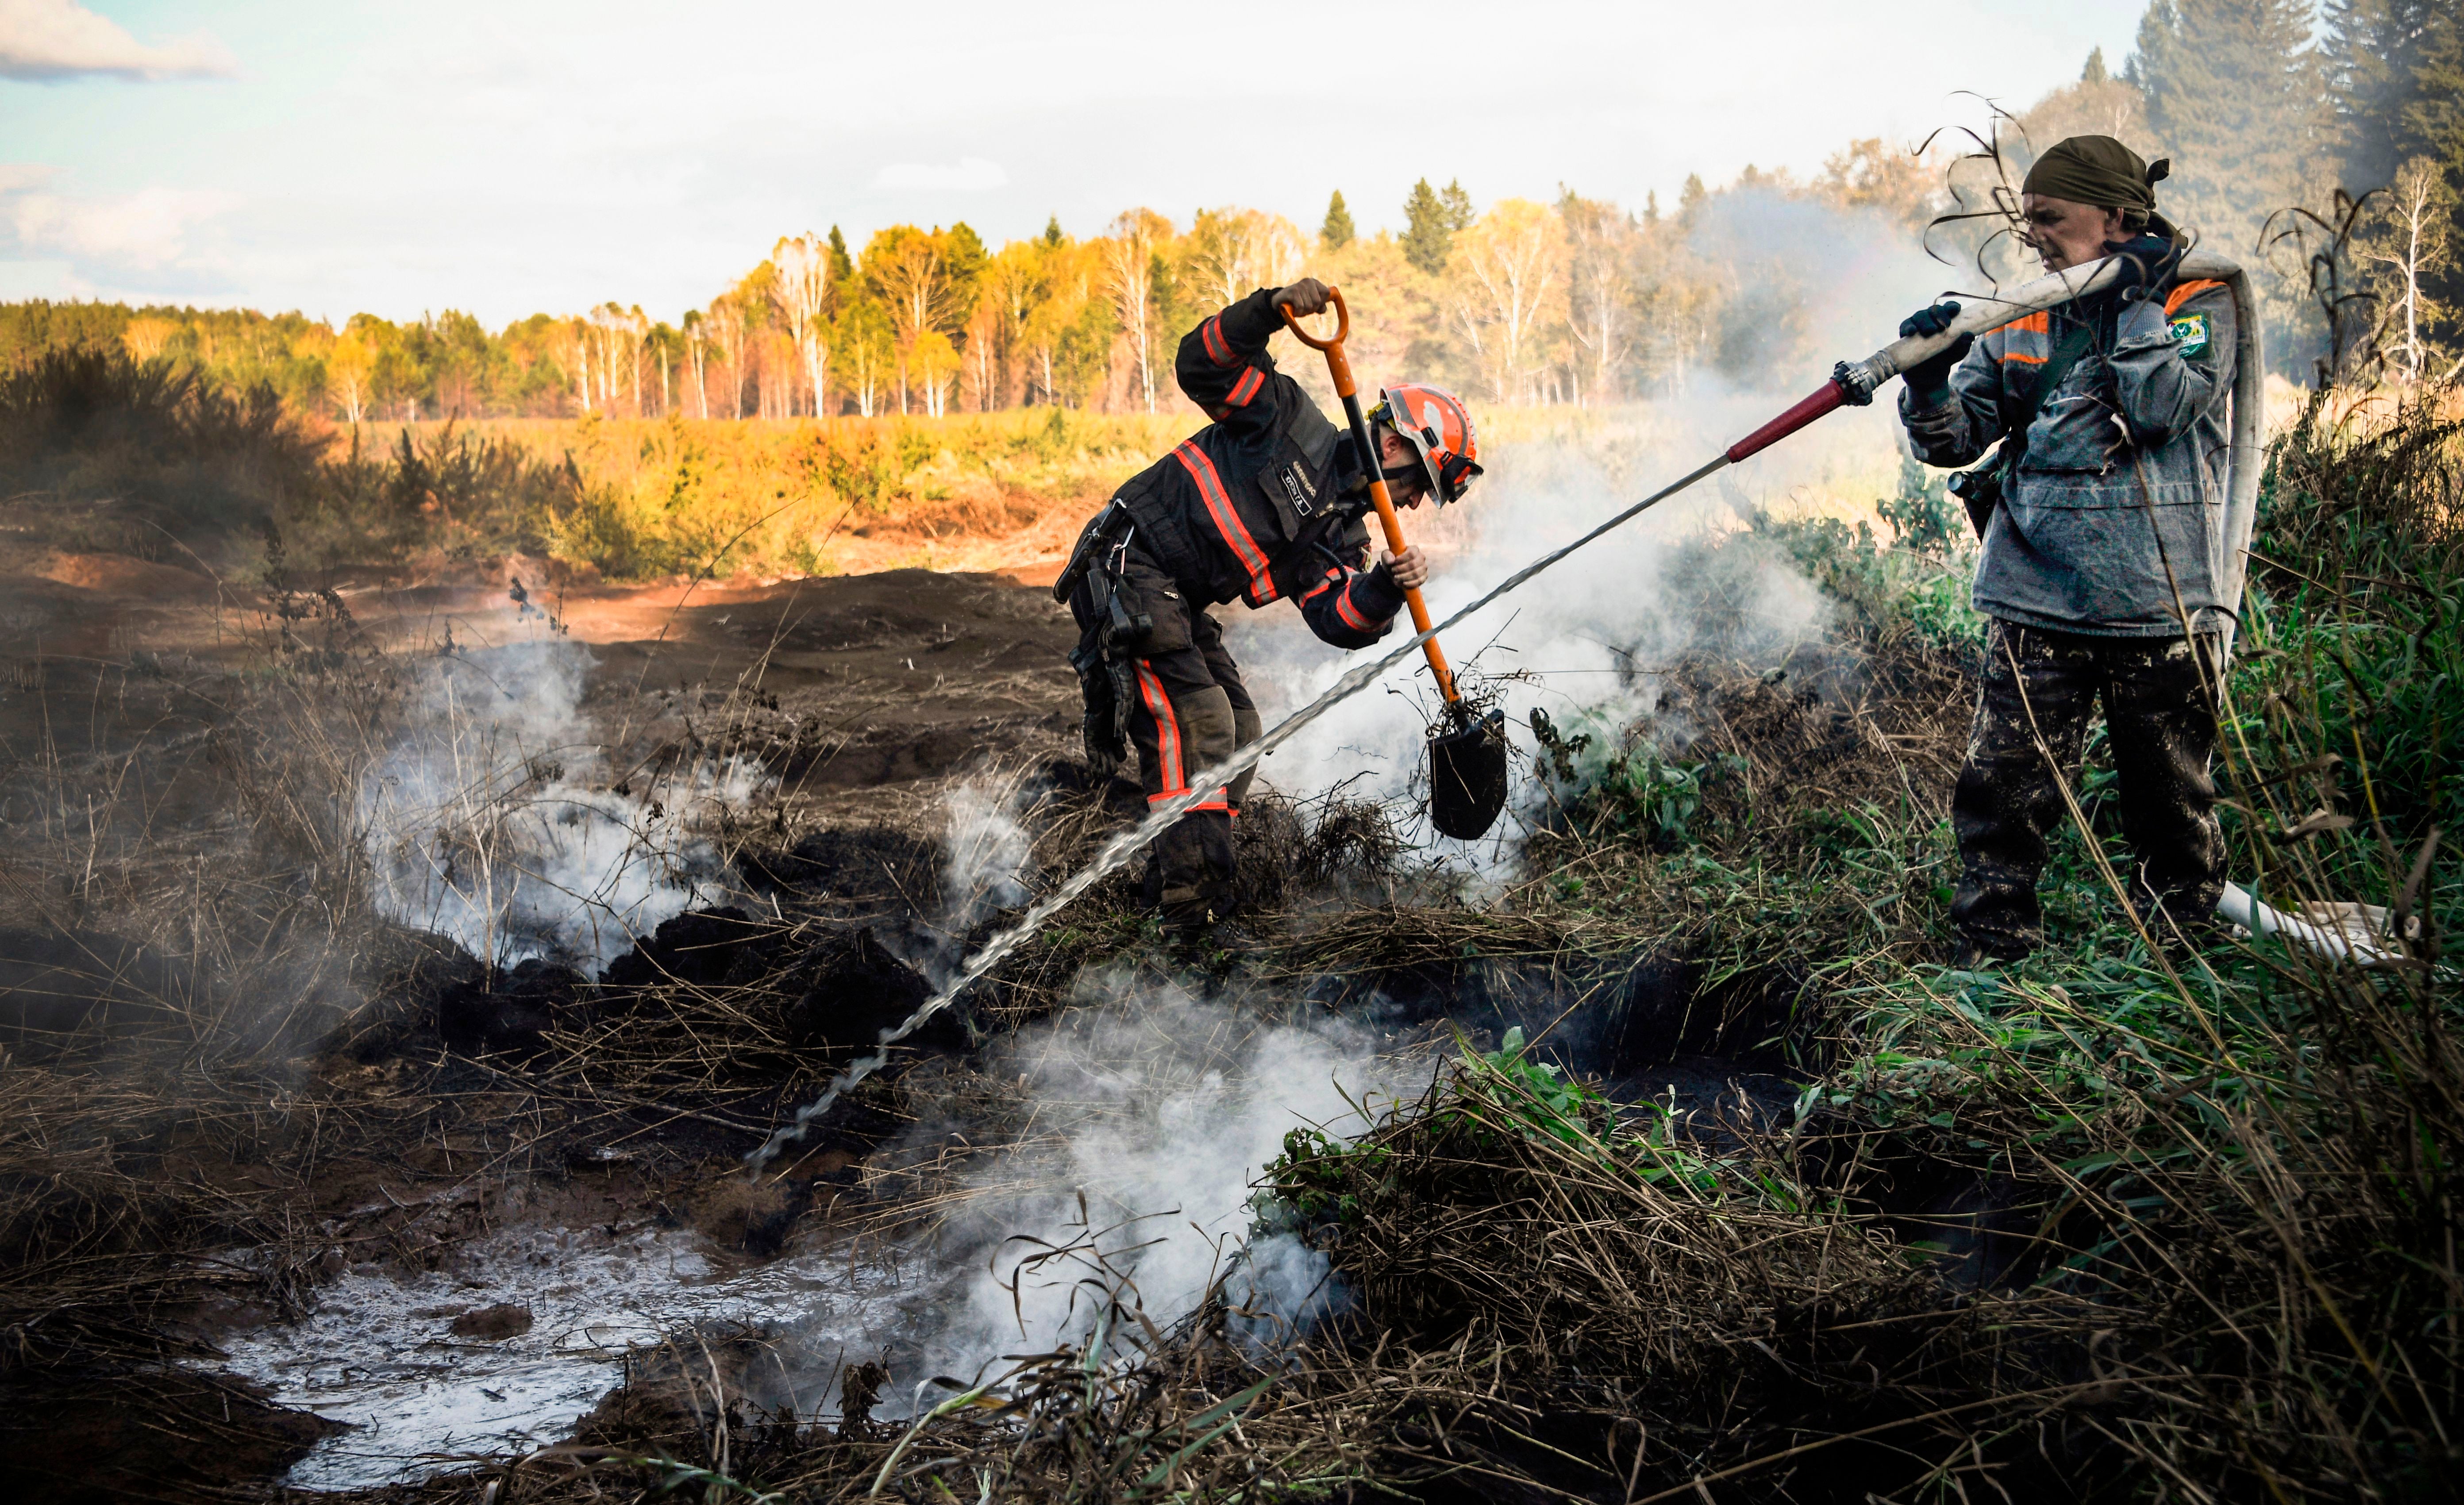 Peatland fires represent an additional threat to the climate because it releases a great deal of carbon dioxide